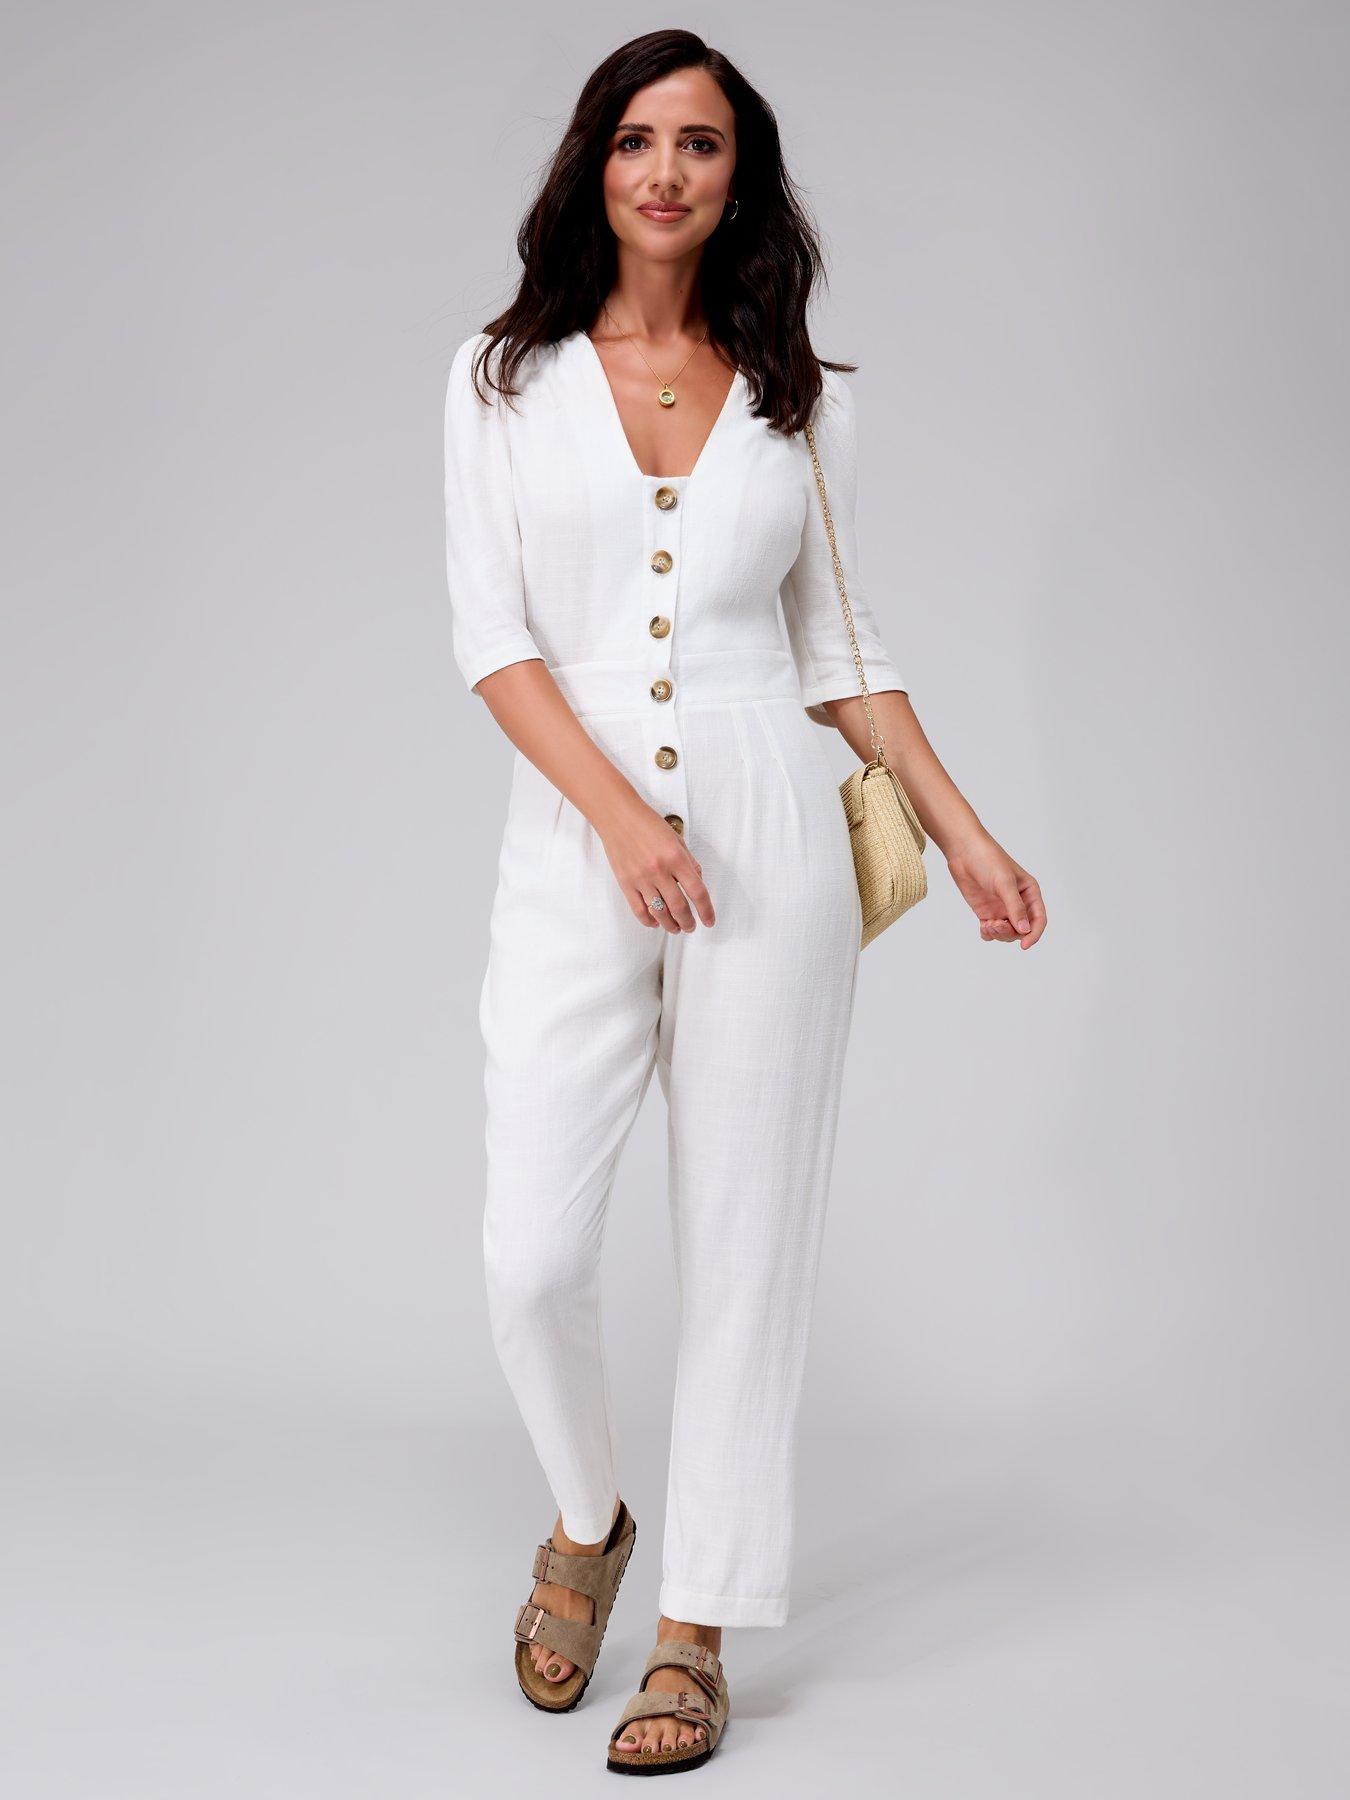 Lucy Mecklenburgh x V by Very Button Through Utility Jumpsuit - Off White